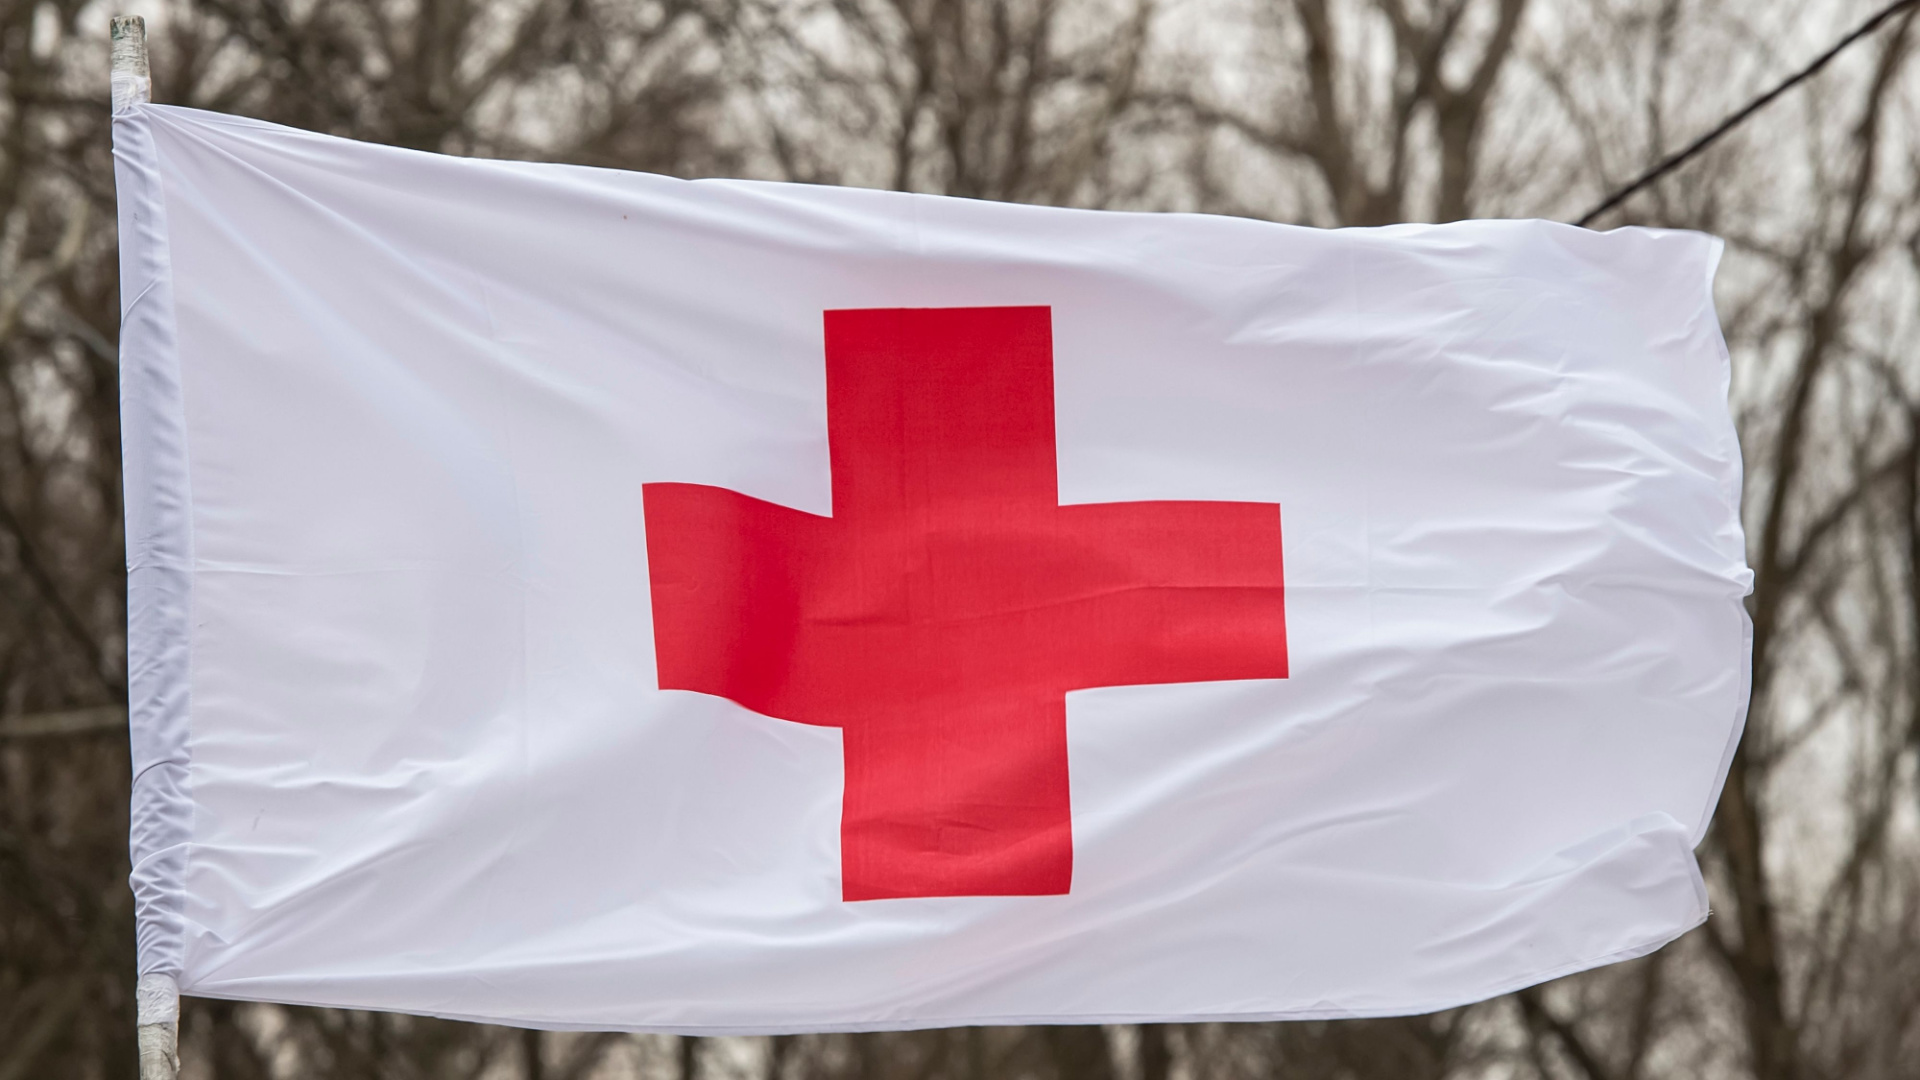 the-red-cross-wants-its-emblem-to-protect-vital-technology-during-wartime-techradar